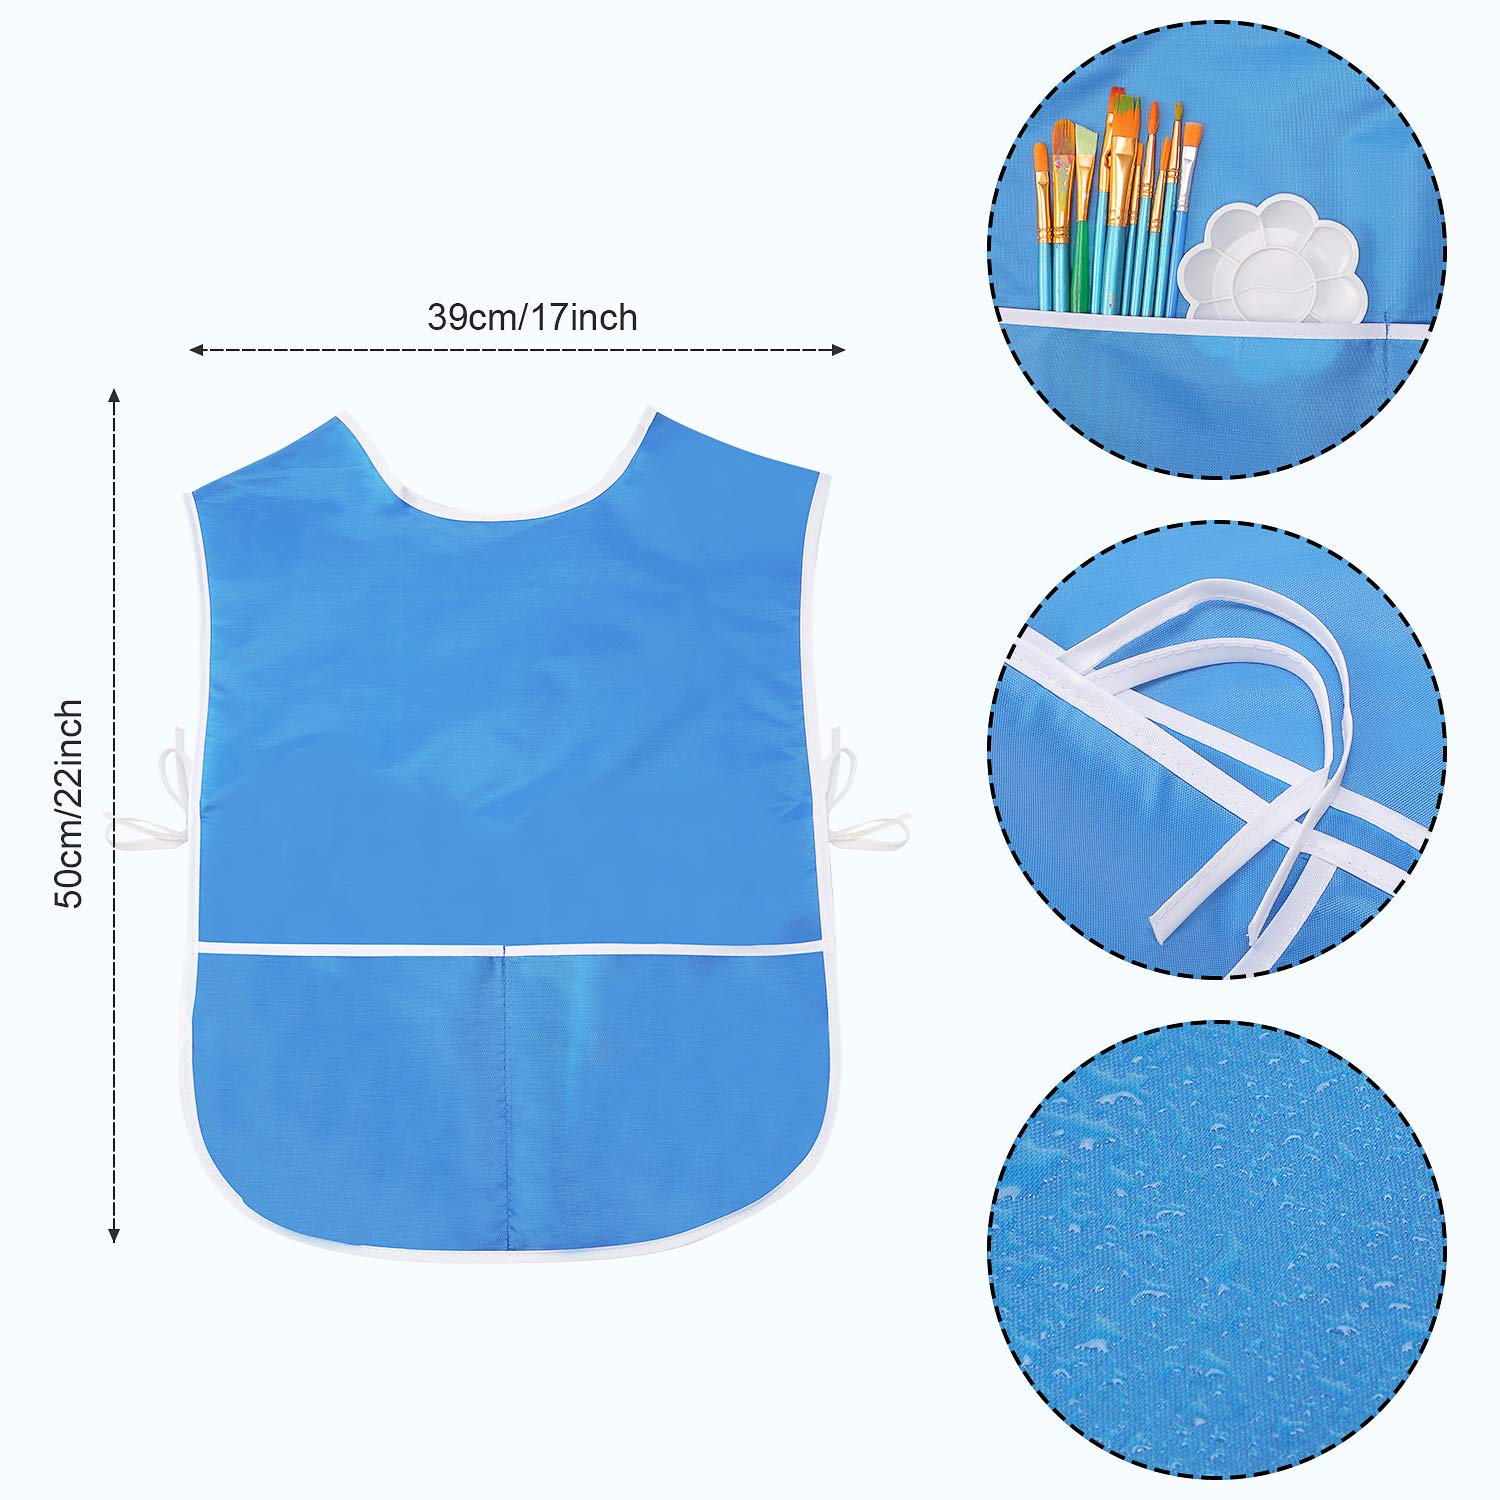 SATINIOR 4 Pieces Art Smock for Kids Artist Smock Waterproof Painting Apron Painting Smocks for Children, 4 Colors